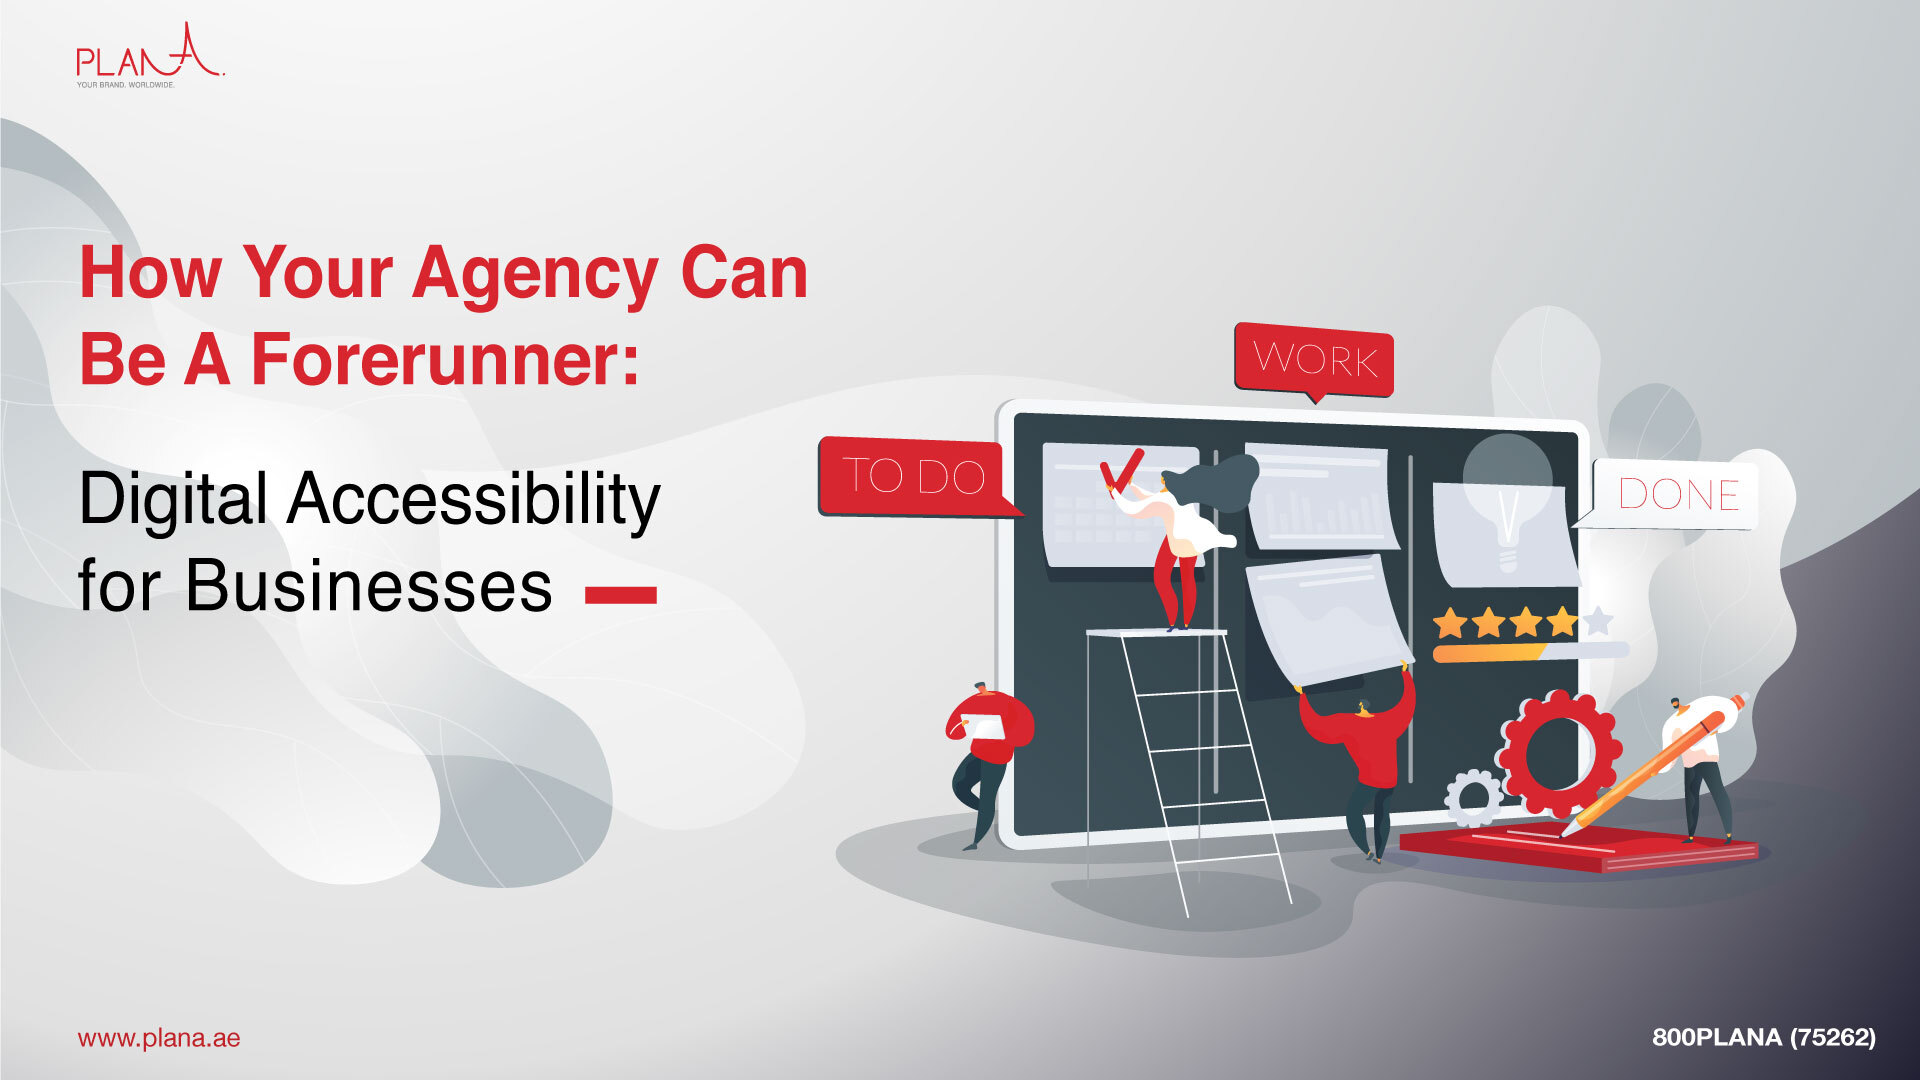 How Your Agency Can Be A Forerunner: Digital Accessibility for Businesses?